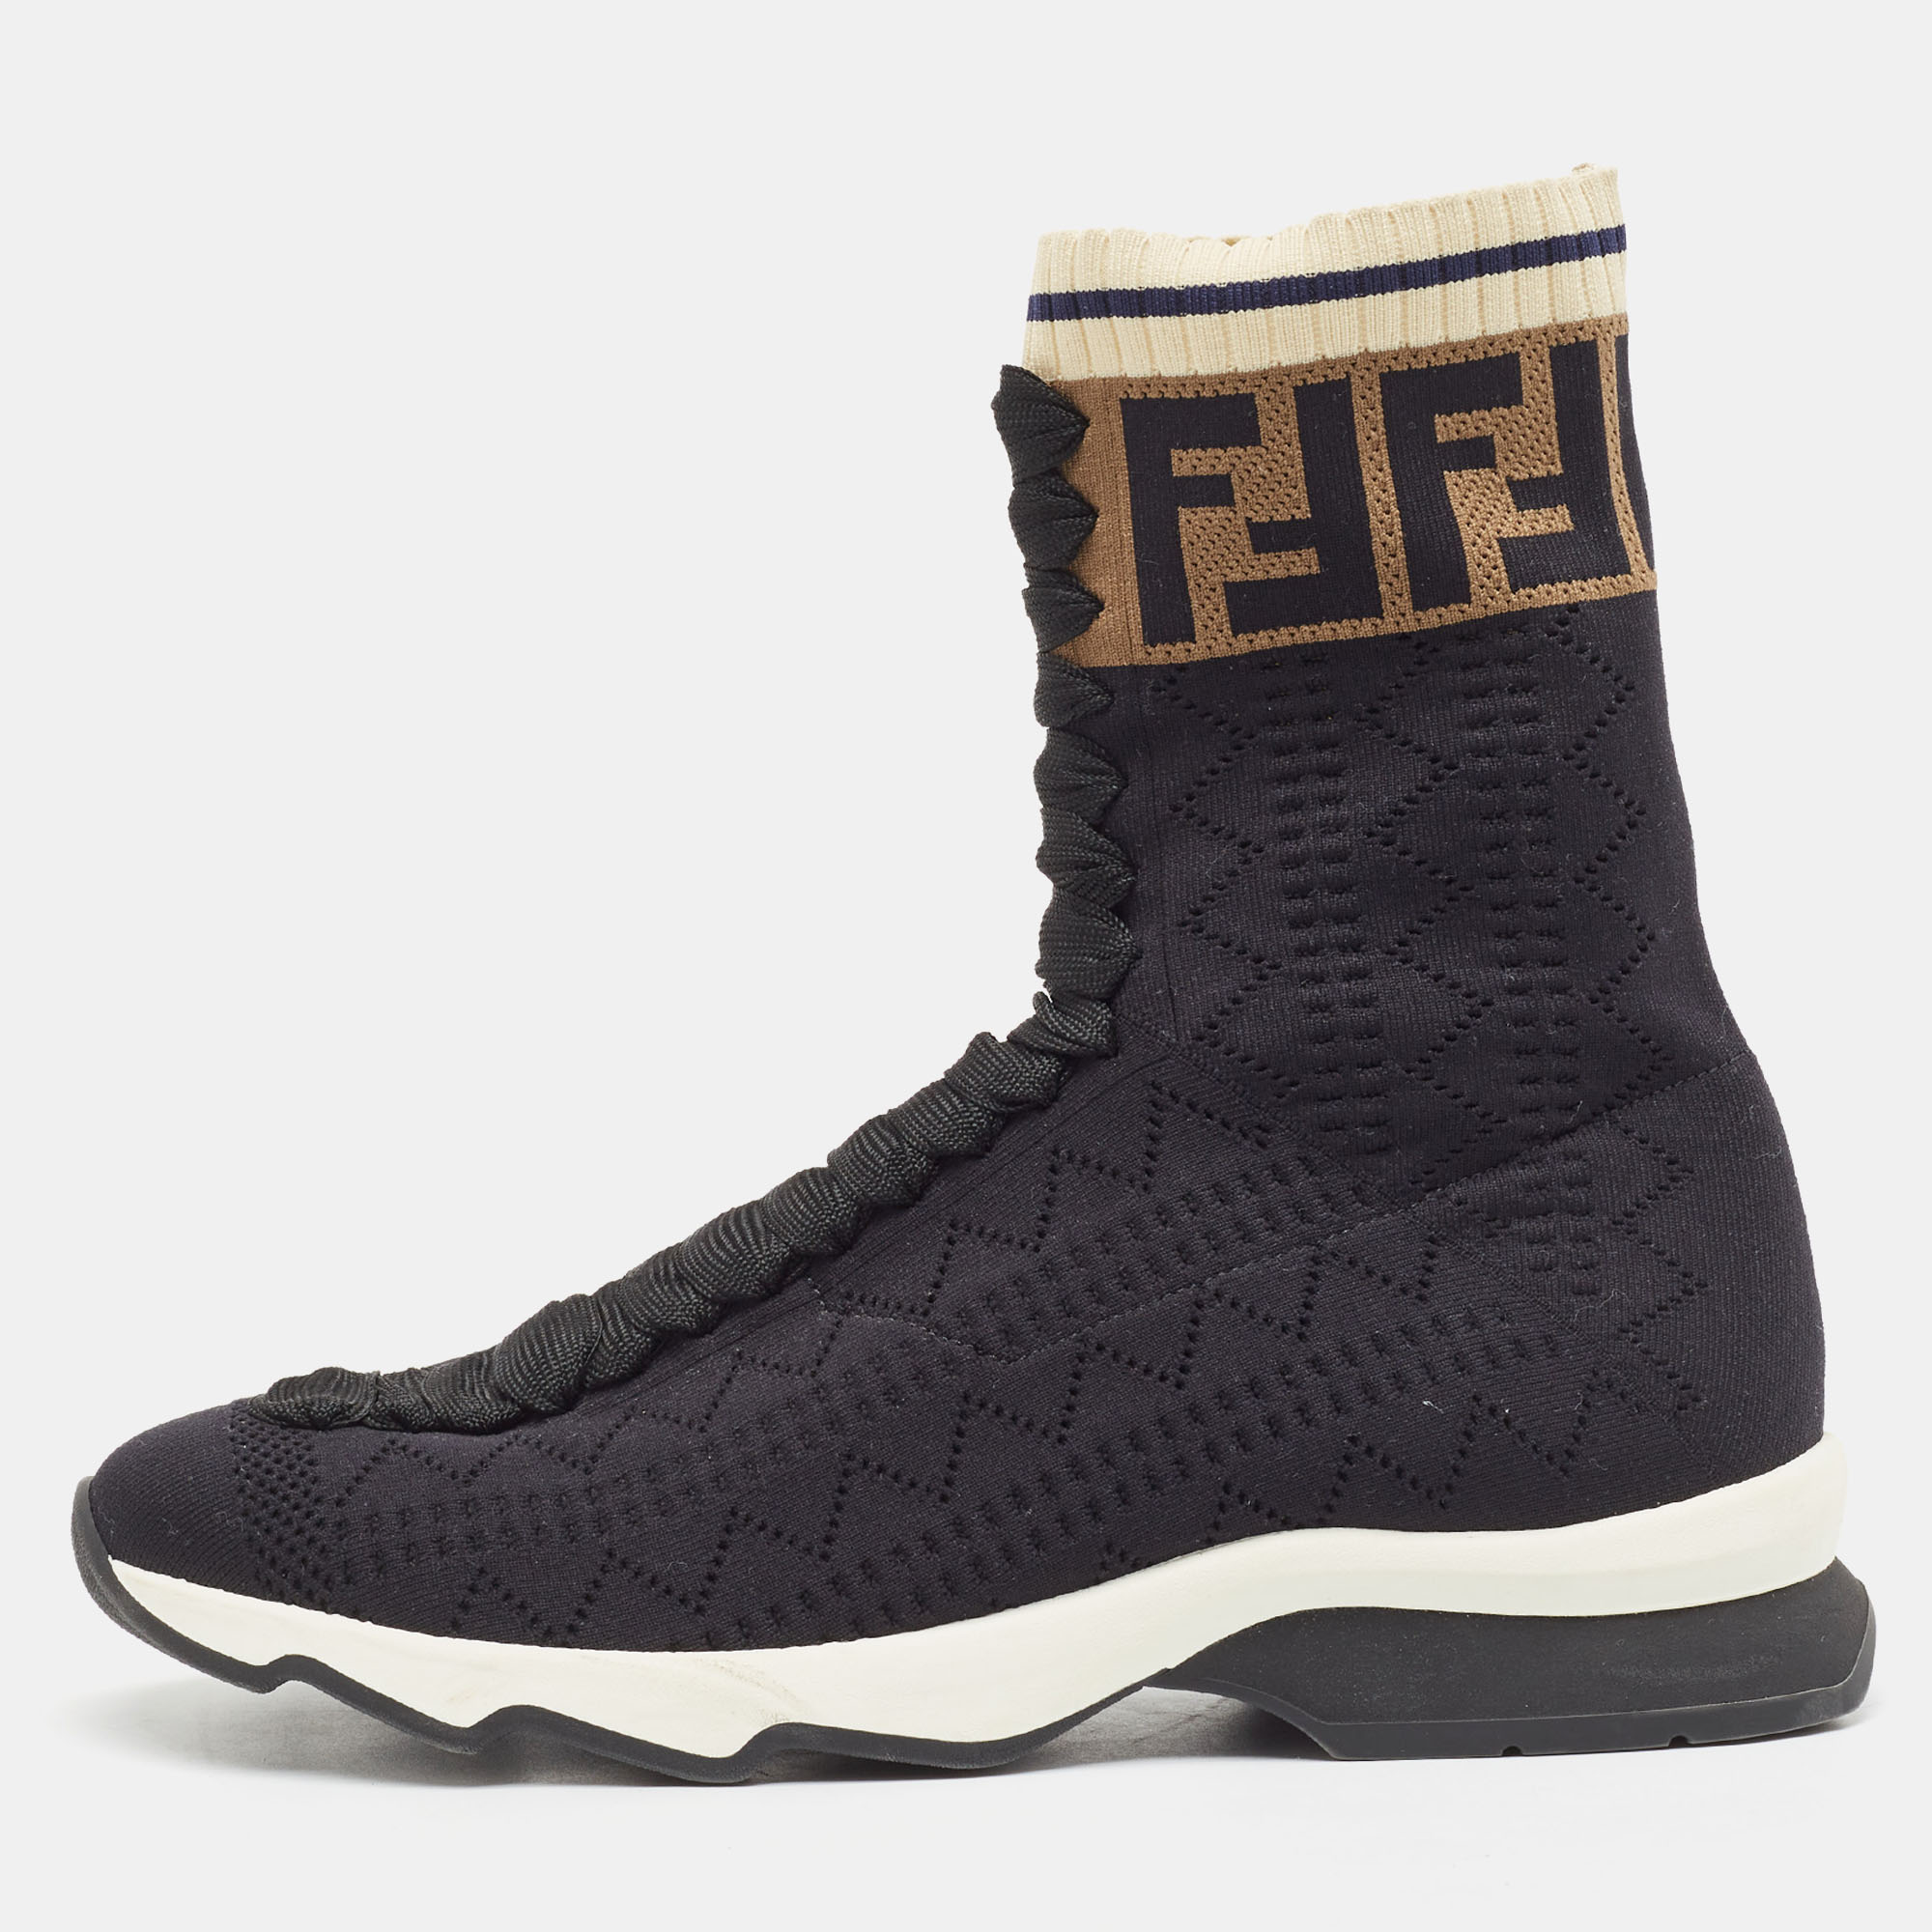 These stylish Rockoko sneakers come from the house of Fendi. Crafted in Italy they are made from leather in a lovely shade of black. They are styled with lace up fronts sock style FF motif detailing and rubber soles.